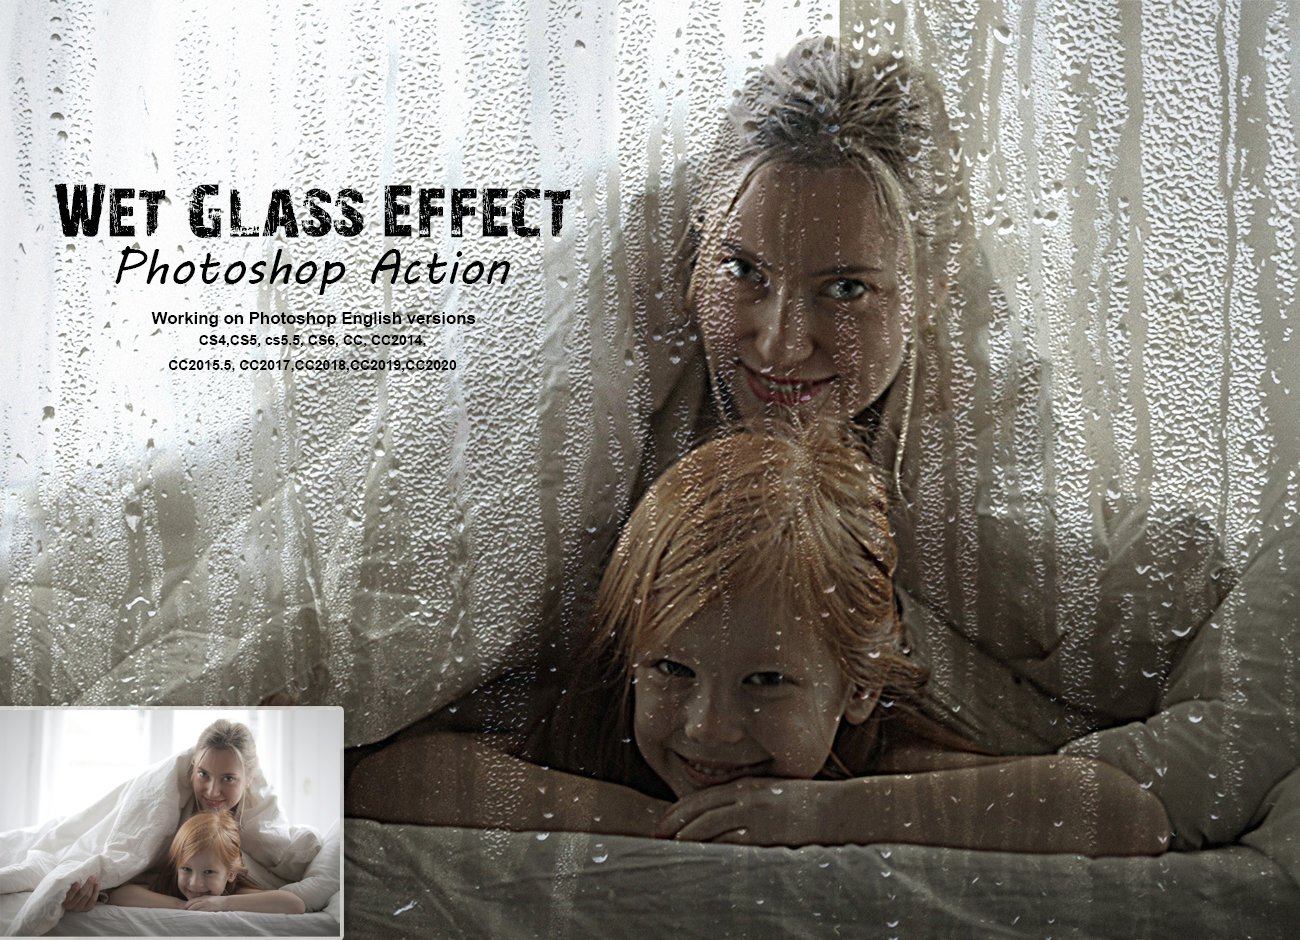 Wet Glass Effect Photoshop Actioncover image.